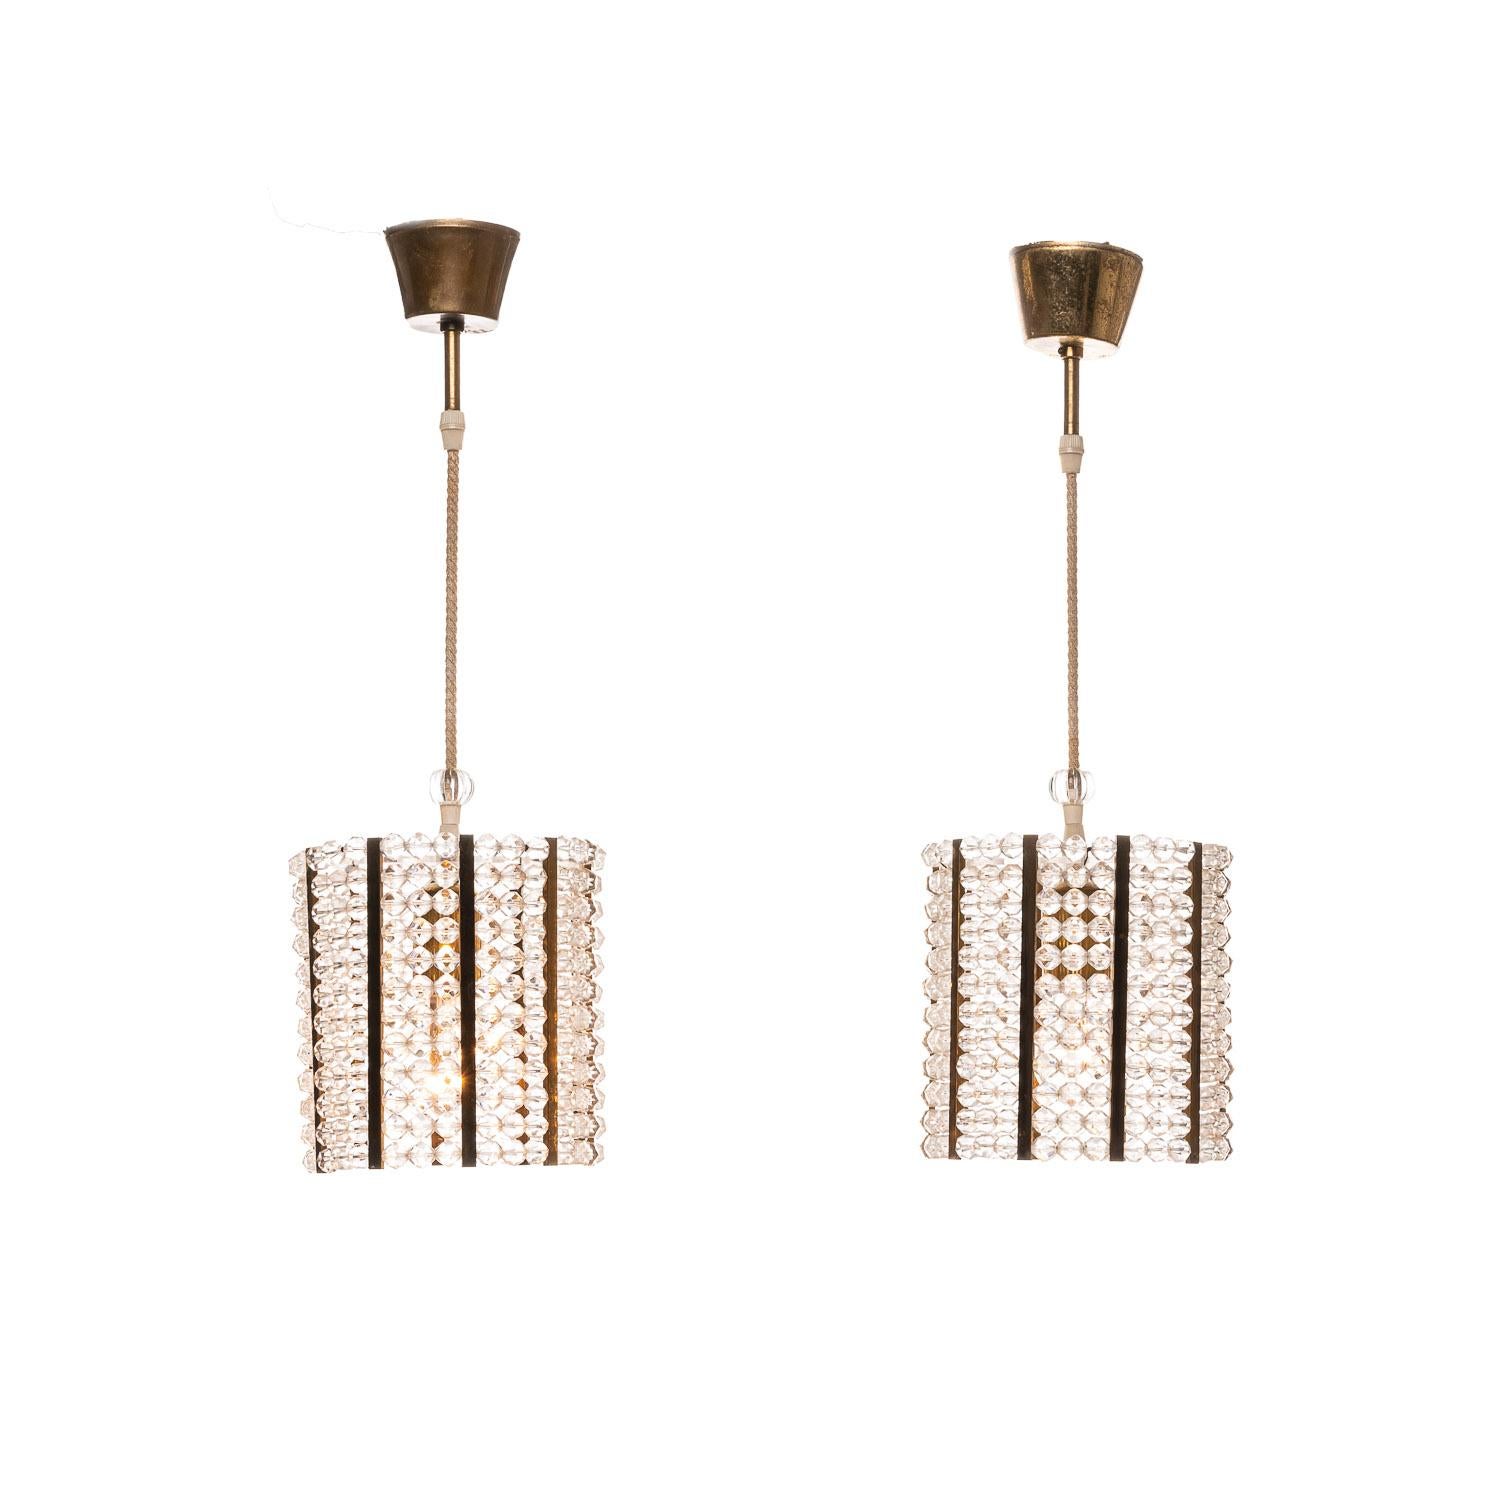 Every room deserves to be seen in its best light. These hanging lamps are the perfect way to do just that. The acrylic beading and contrasting brass elements add an air of opulence to the beautiful lights. They have a presence in any room, measuring